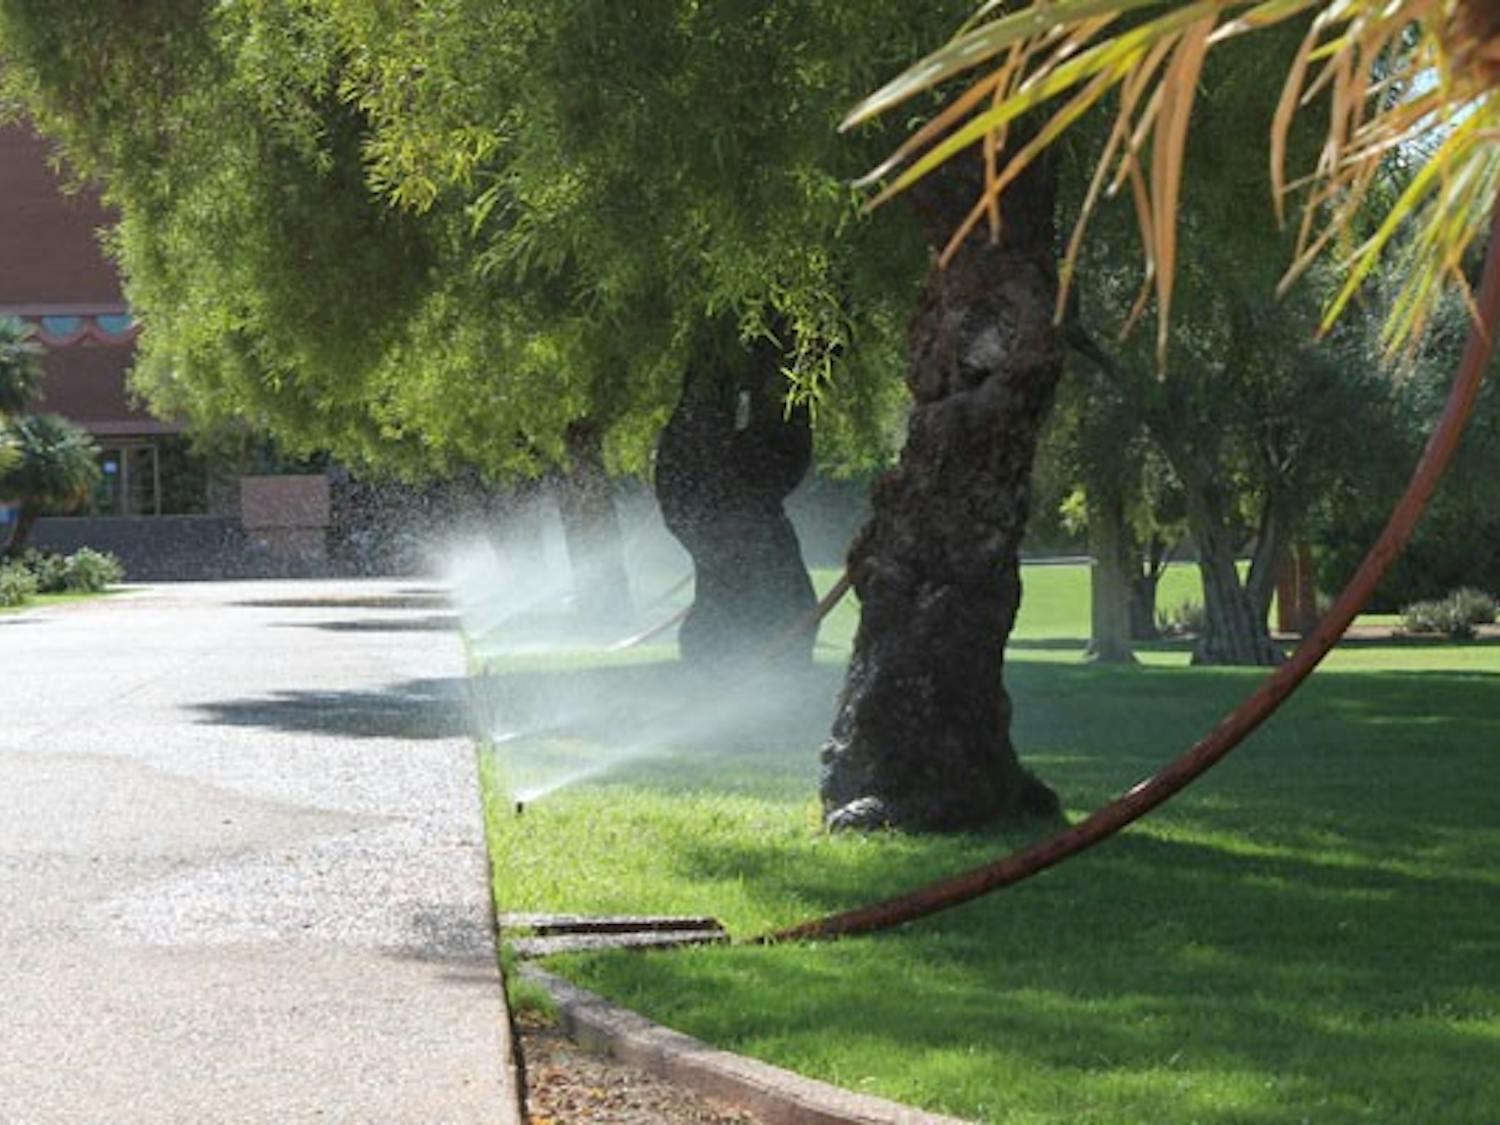 The grass near the ASU Gammage gets a nice sprinkling of water on a warm fall day. (Photo by Robin Kiyutelluk)